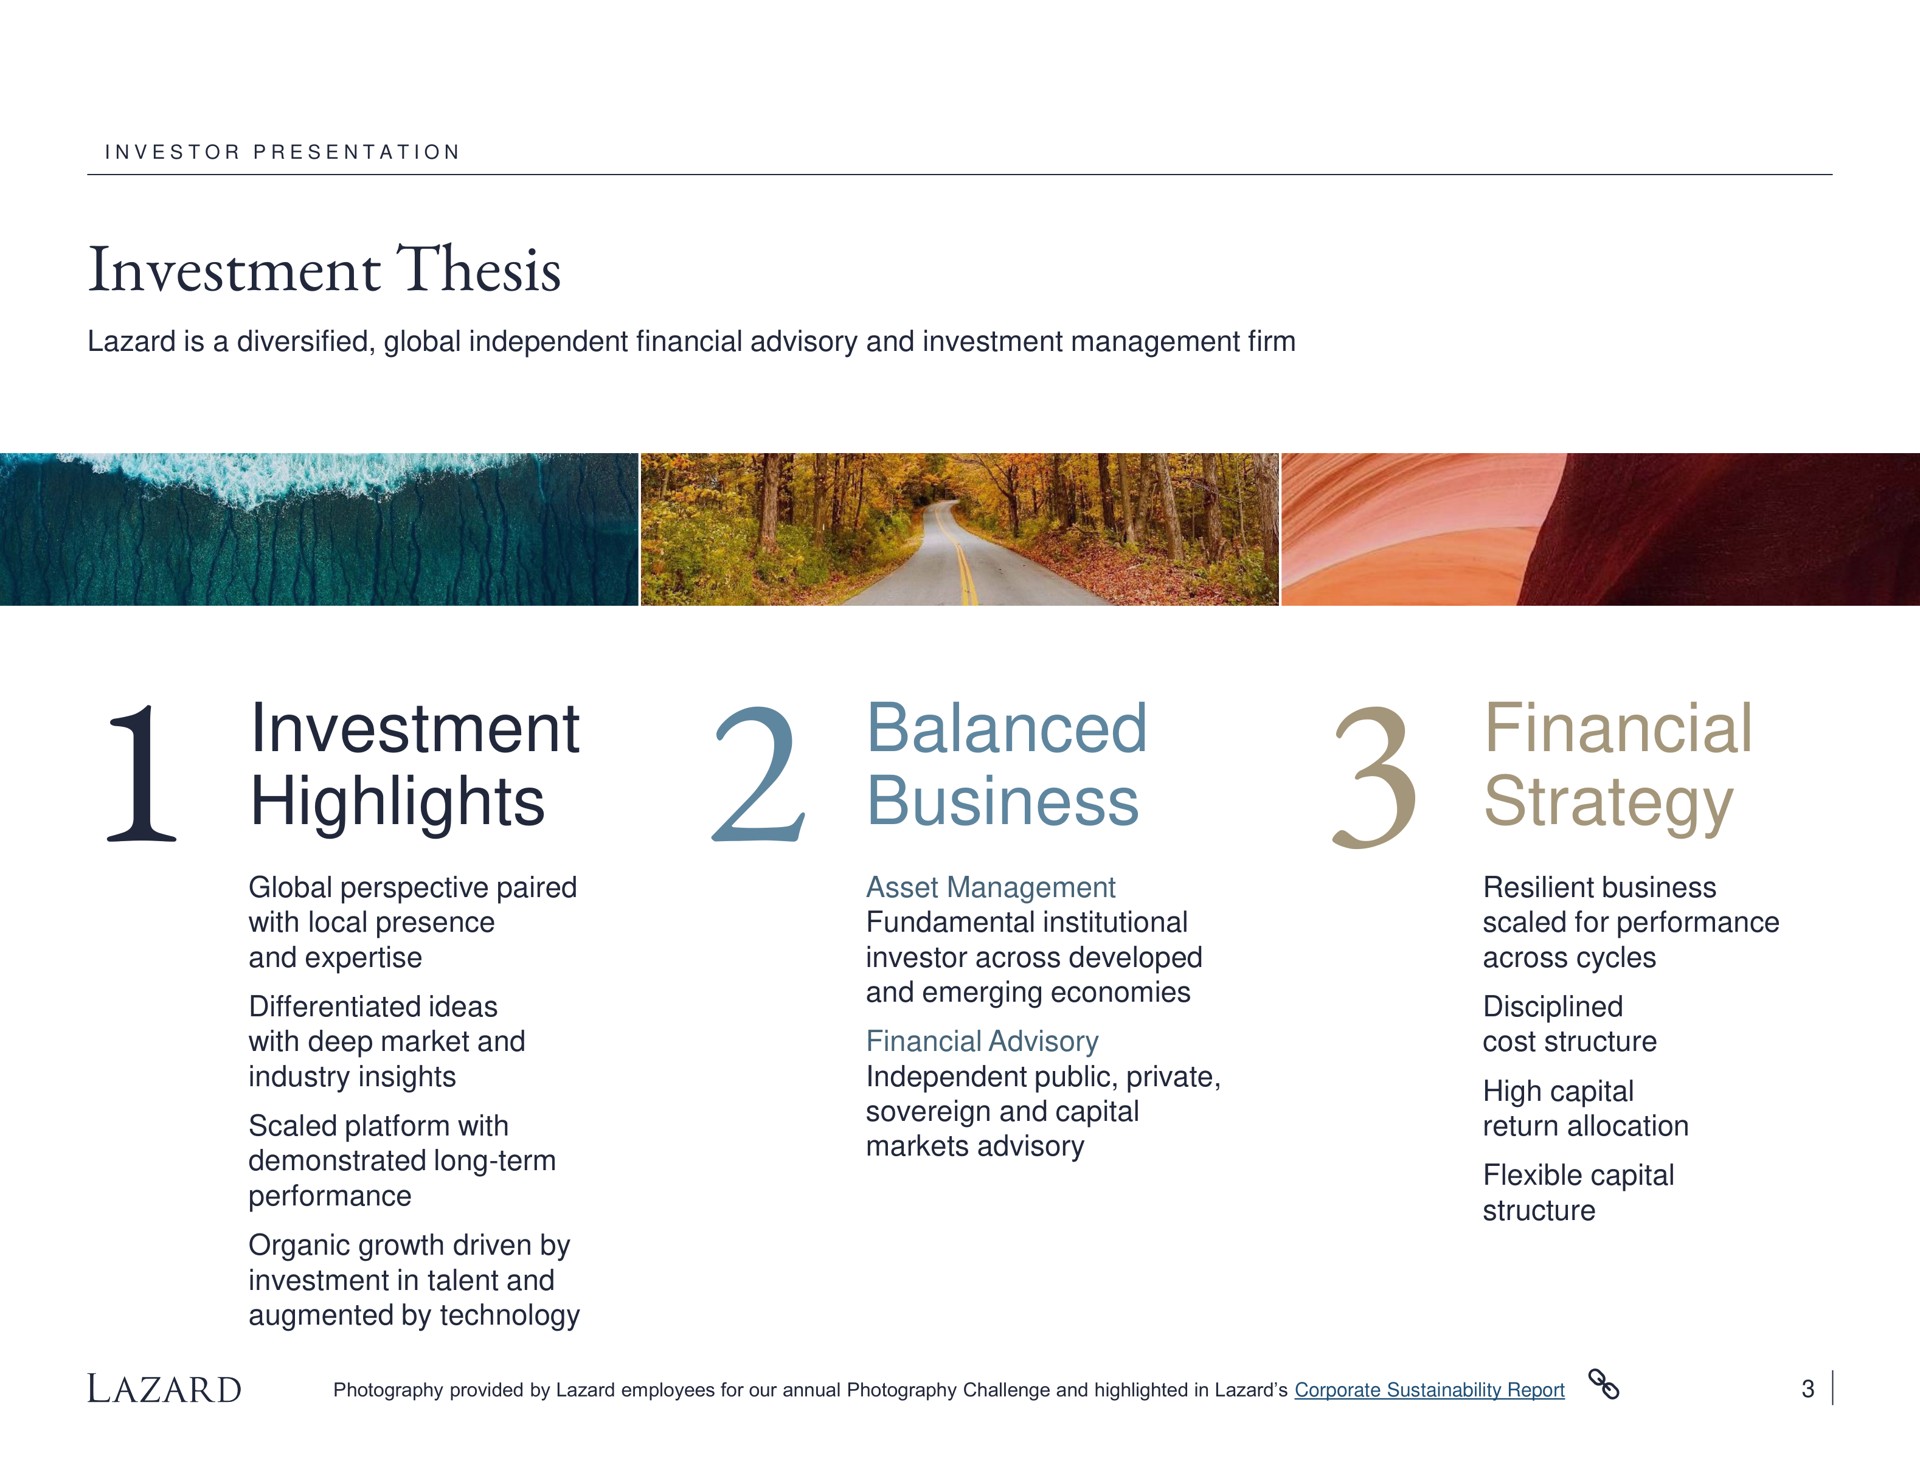 investment thesis investment highlights balanced business financial strategy | Lazard